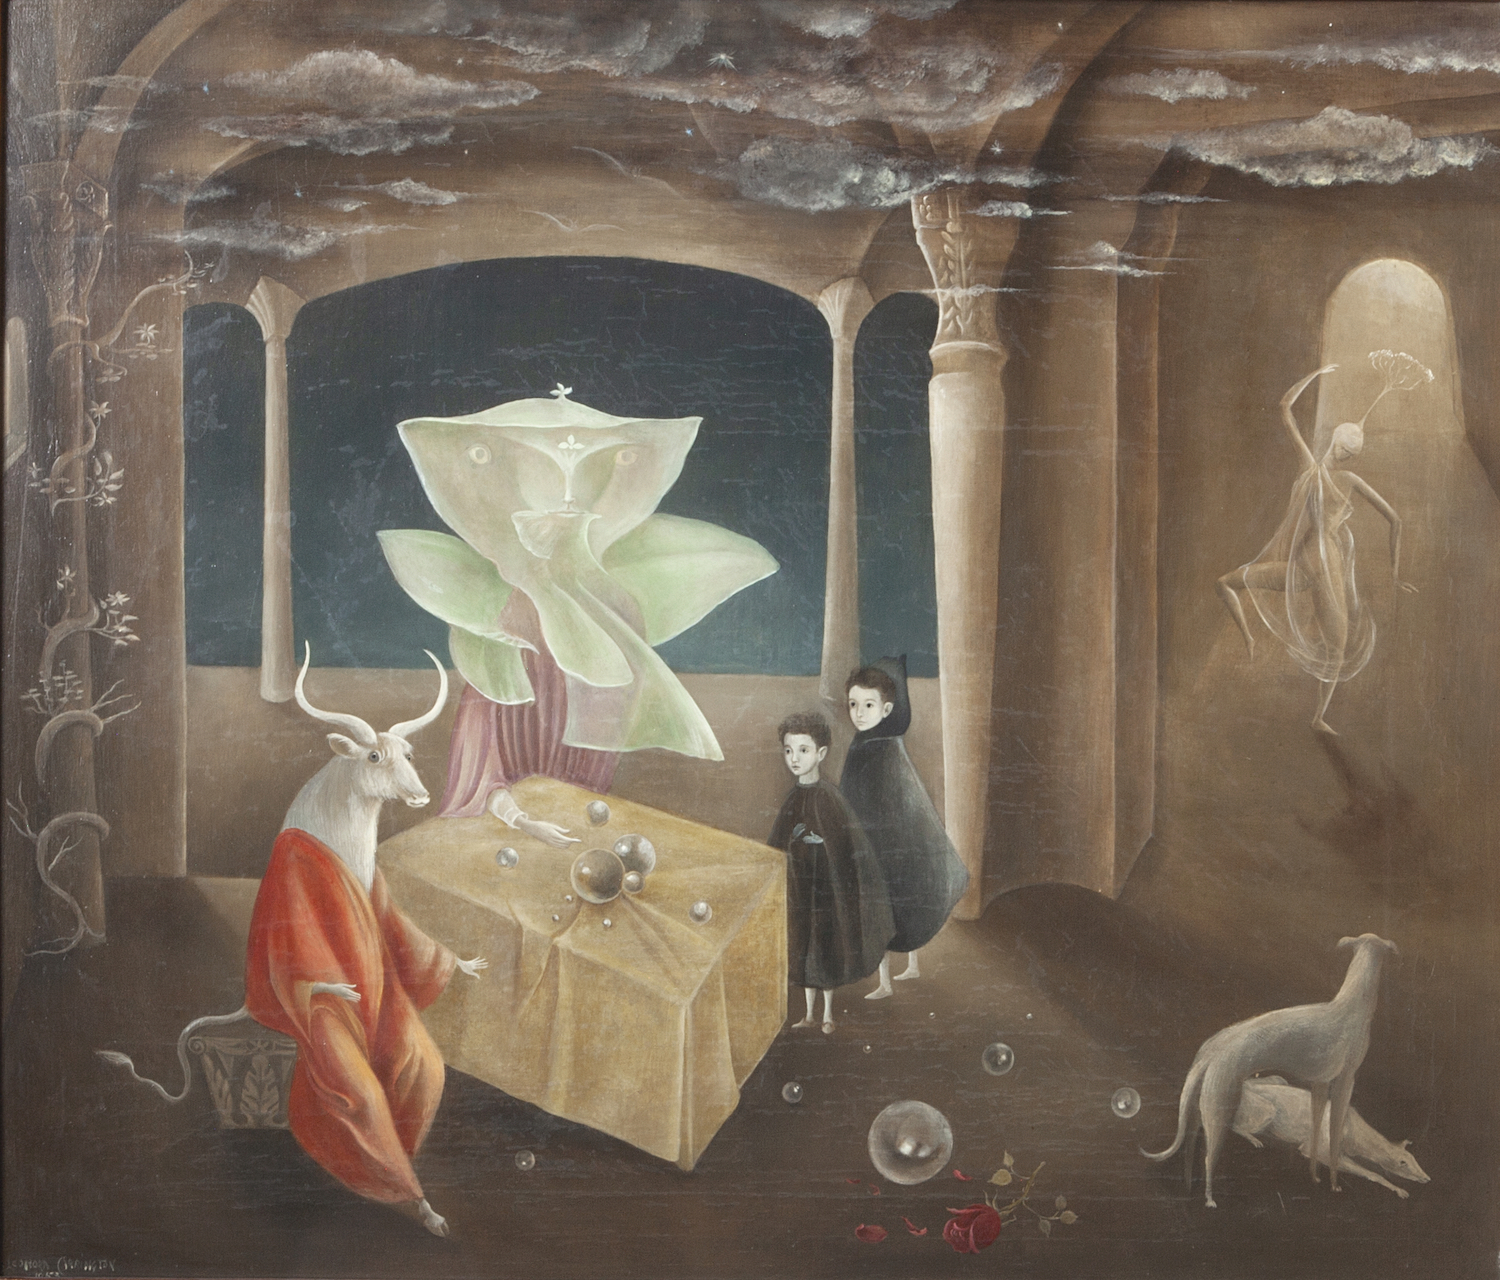  Leonora Carrington,  And Then We Saw the Daughter of the Minotaur! , 1953, Oil on Canvas, 23 3/5 x 27 1/2 inches (60 x 70 cm), © 2019 Estate of Leonora Carrington / Artists Rights Society (ARS), New York 